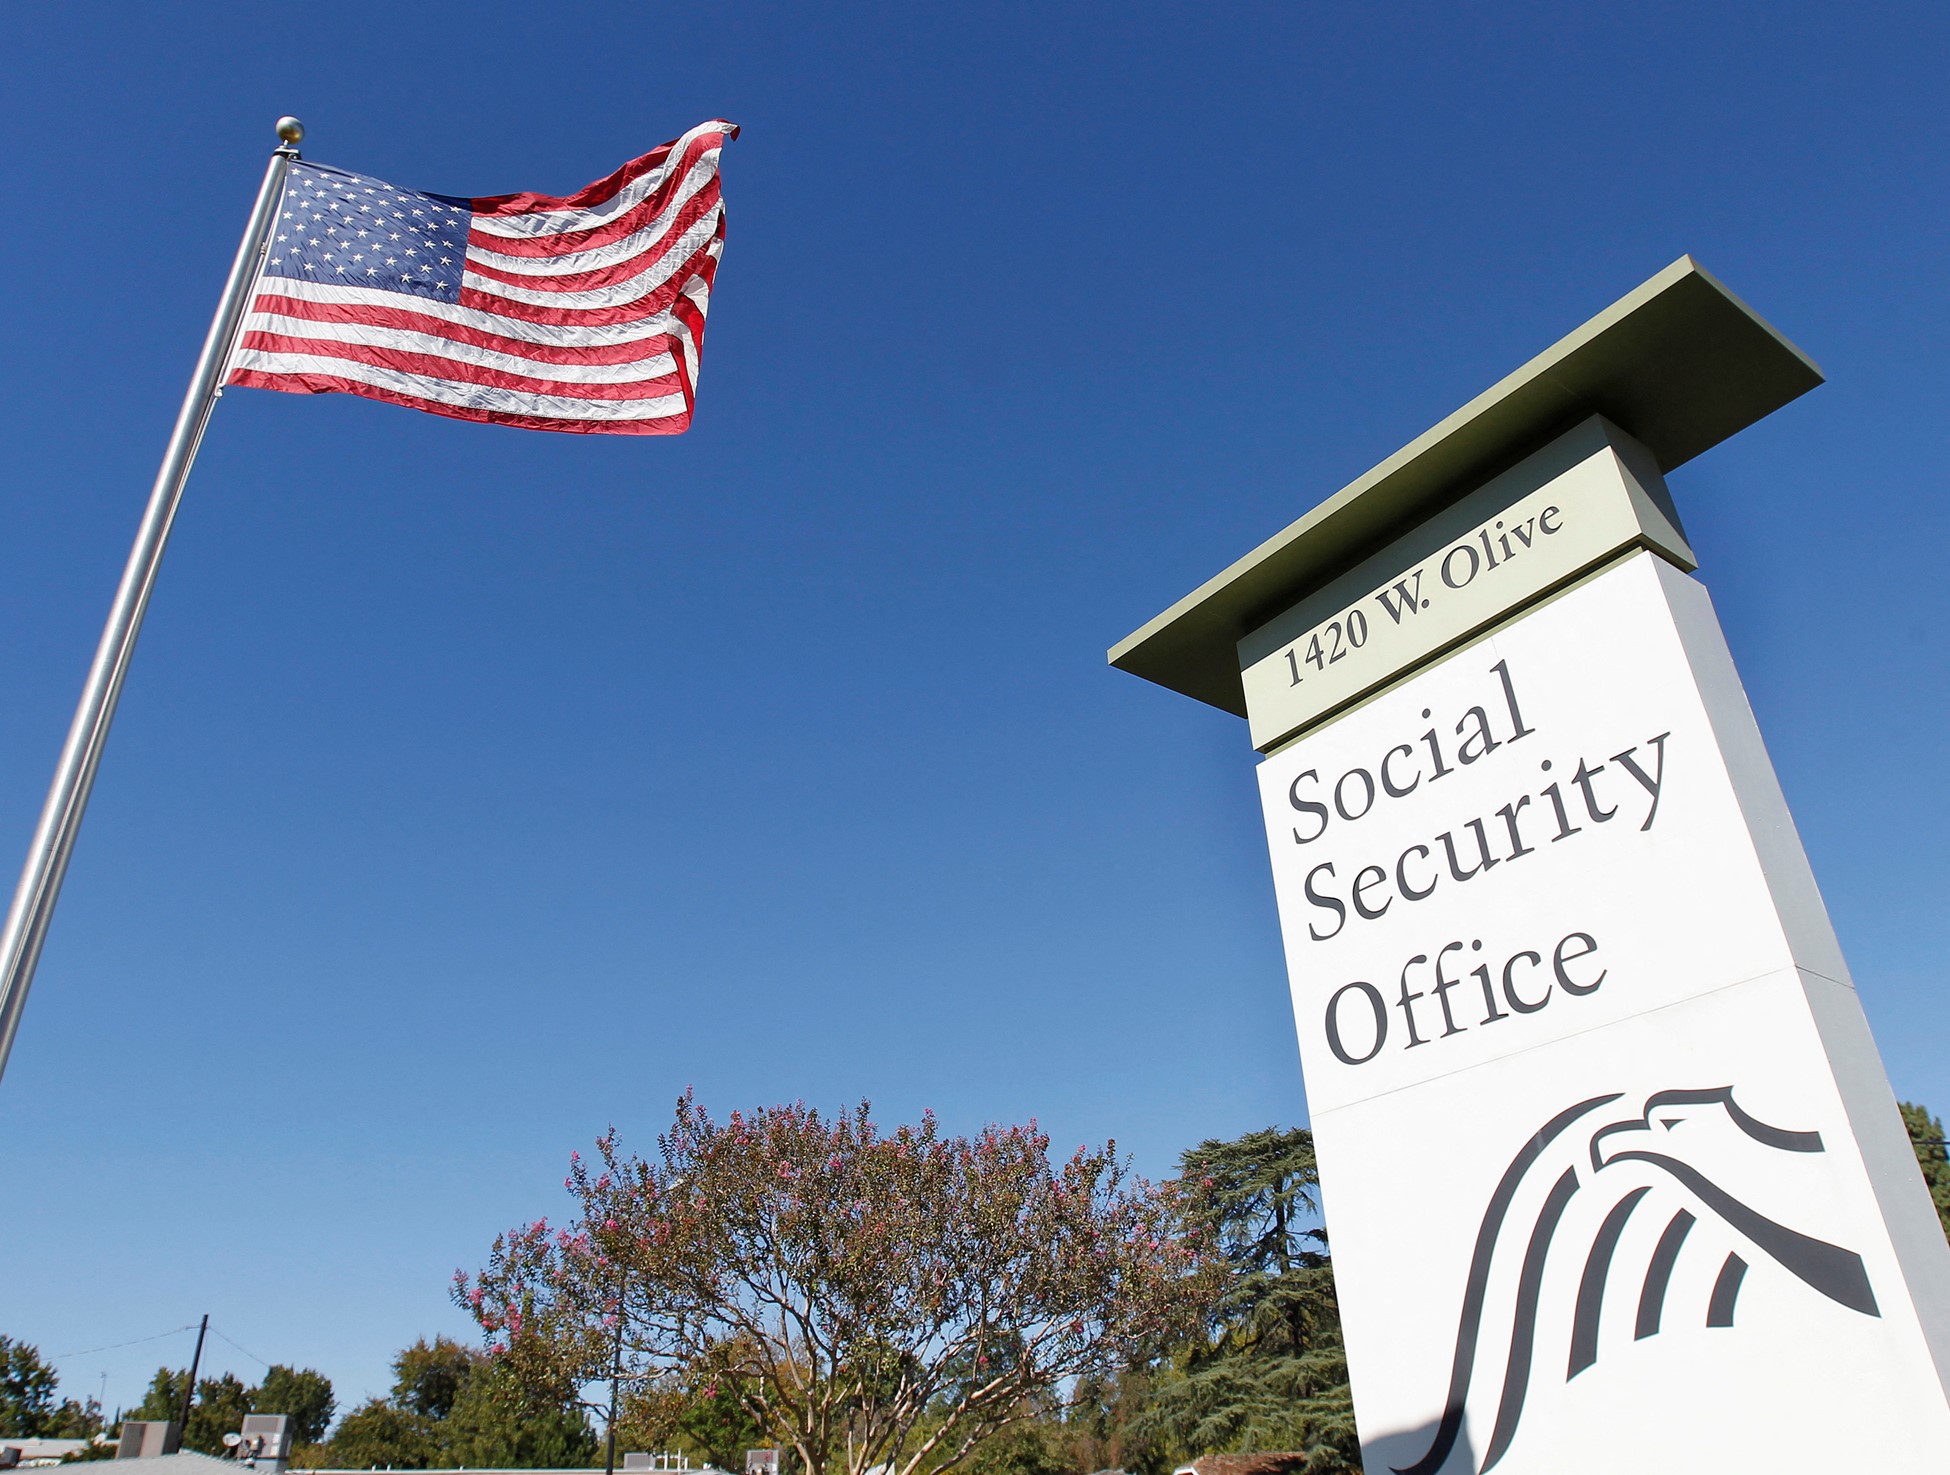 An American flag in the wind next to signage for a United States Social Security Administration office